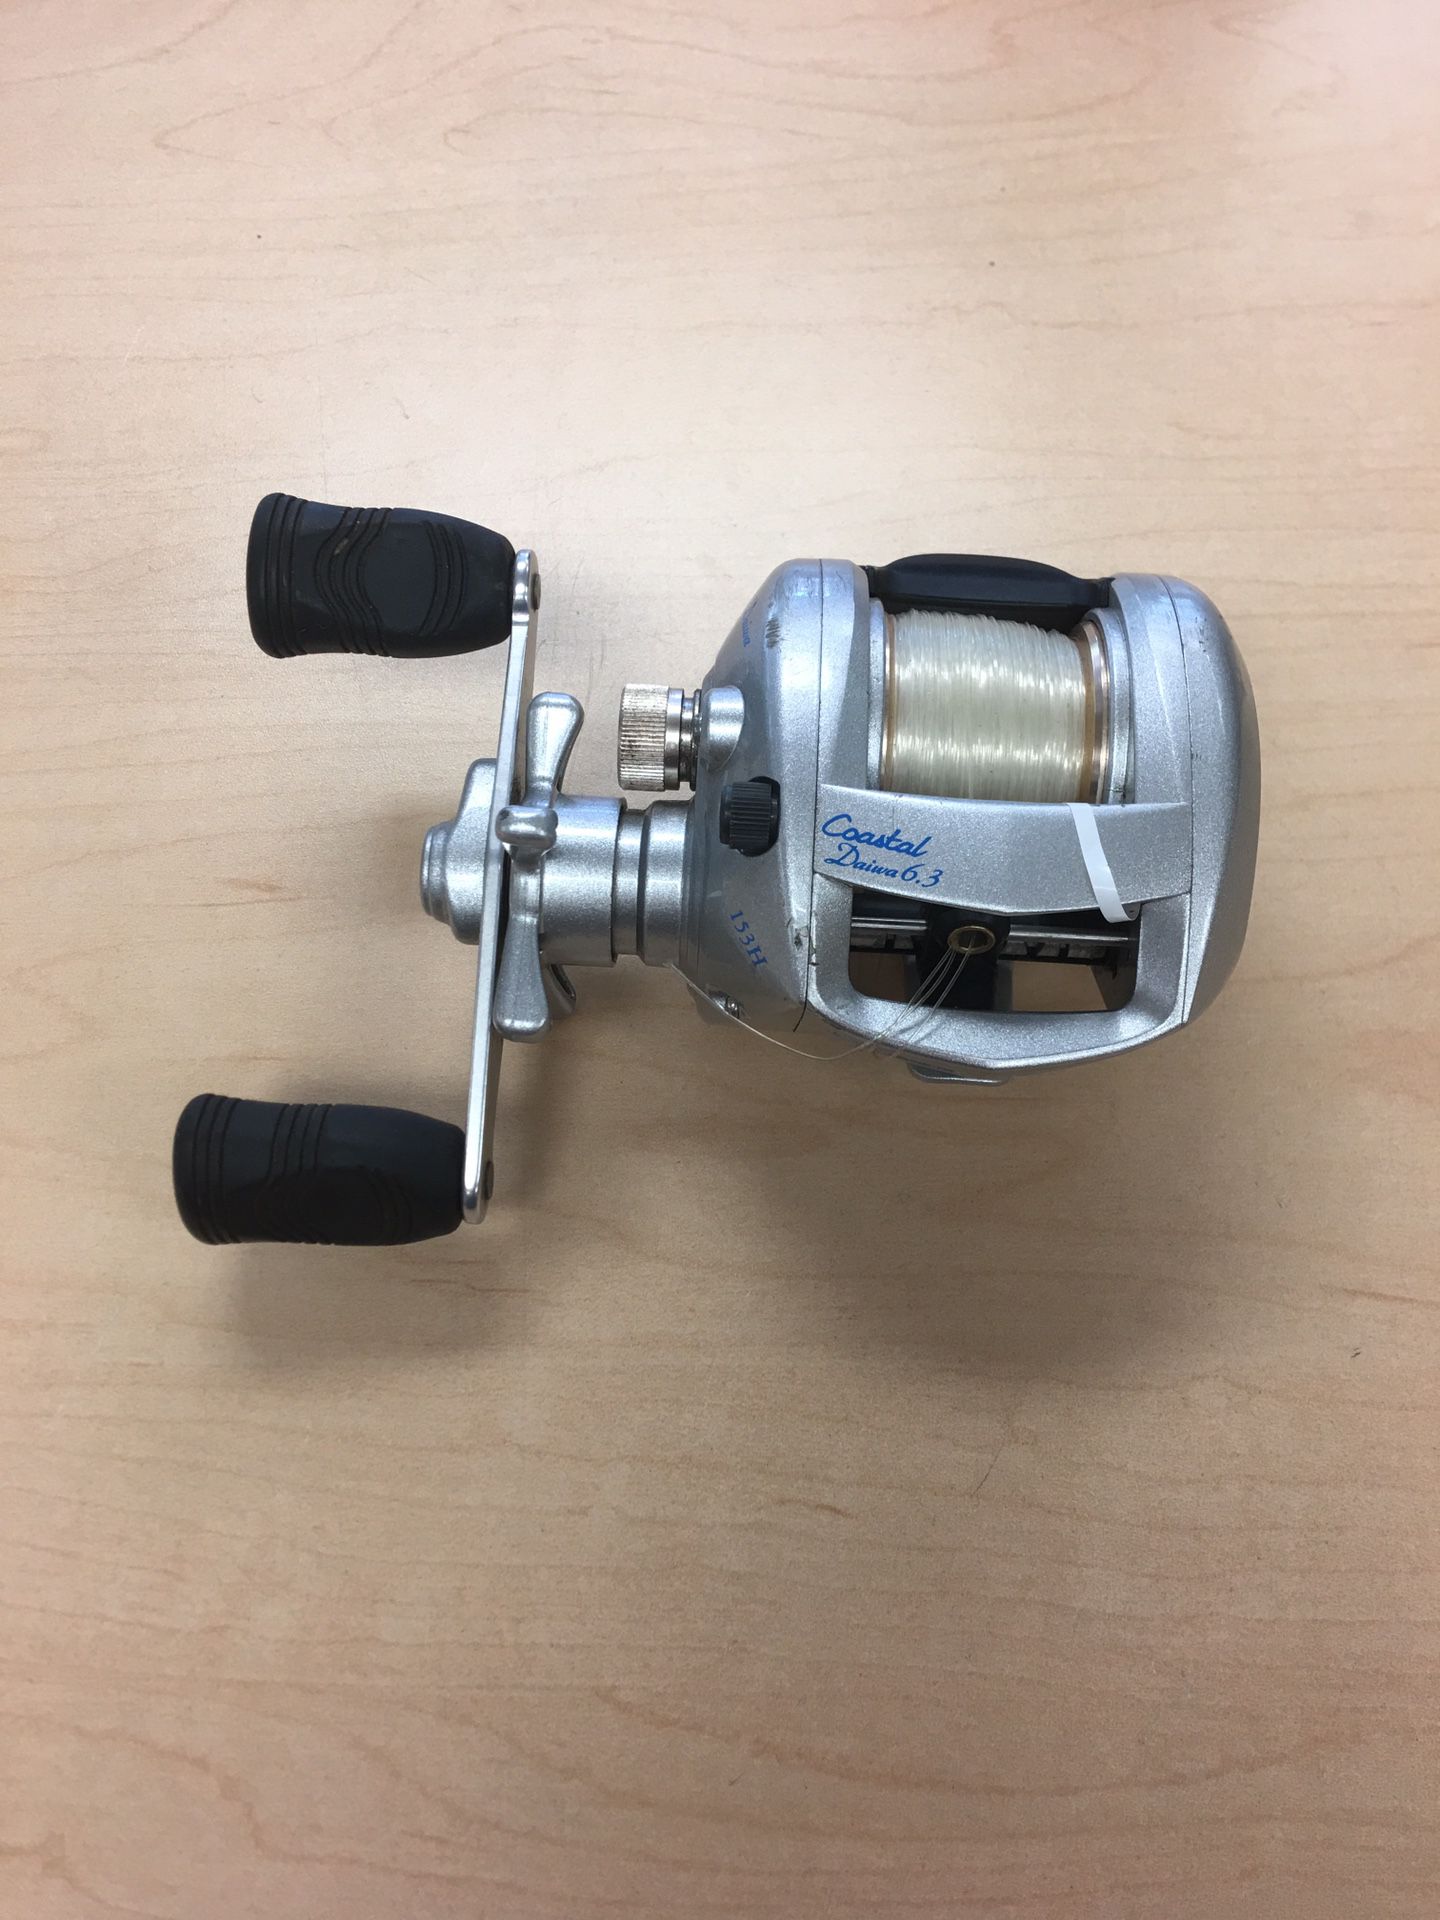 Daiwa 153H Coastal Inshore Special Fishing Reel for Sale in San Diego, CA -  OfferUp